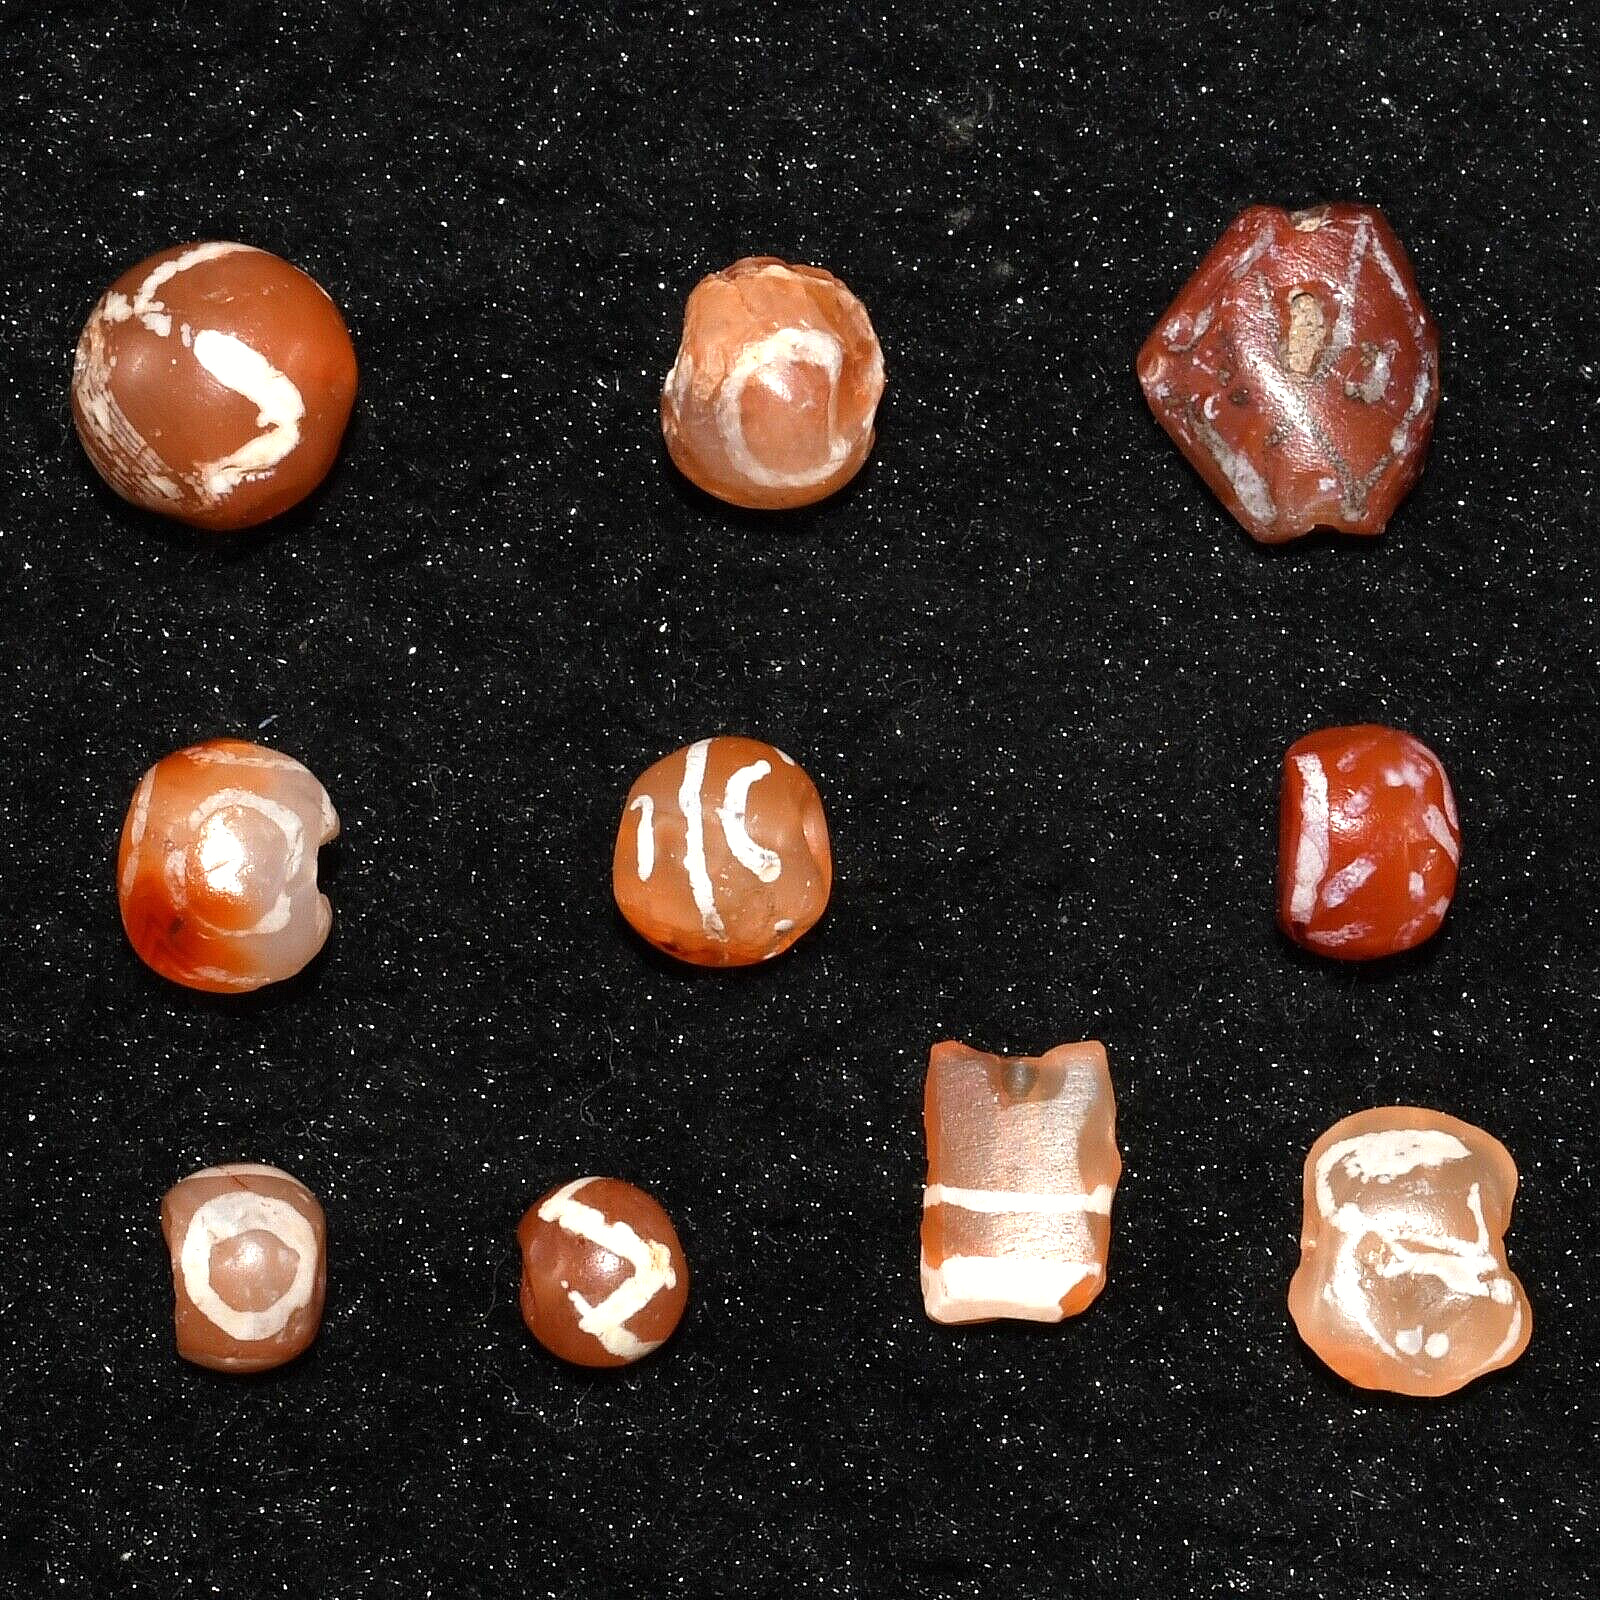 10 Ancient Etched Carnelian Beads in Good Condition 1500 to 2000 Years Old